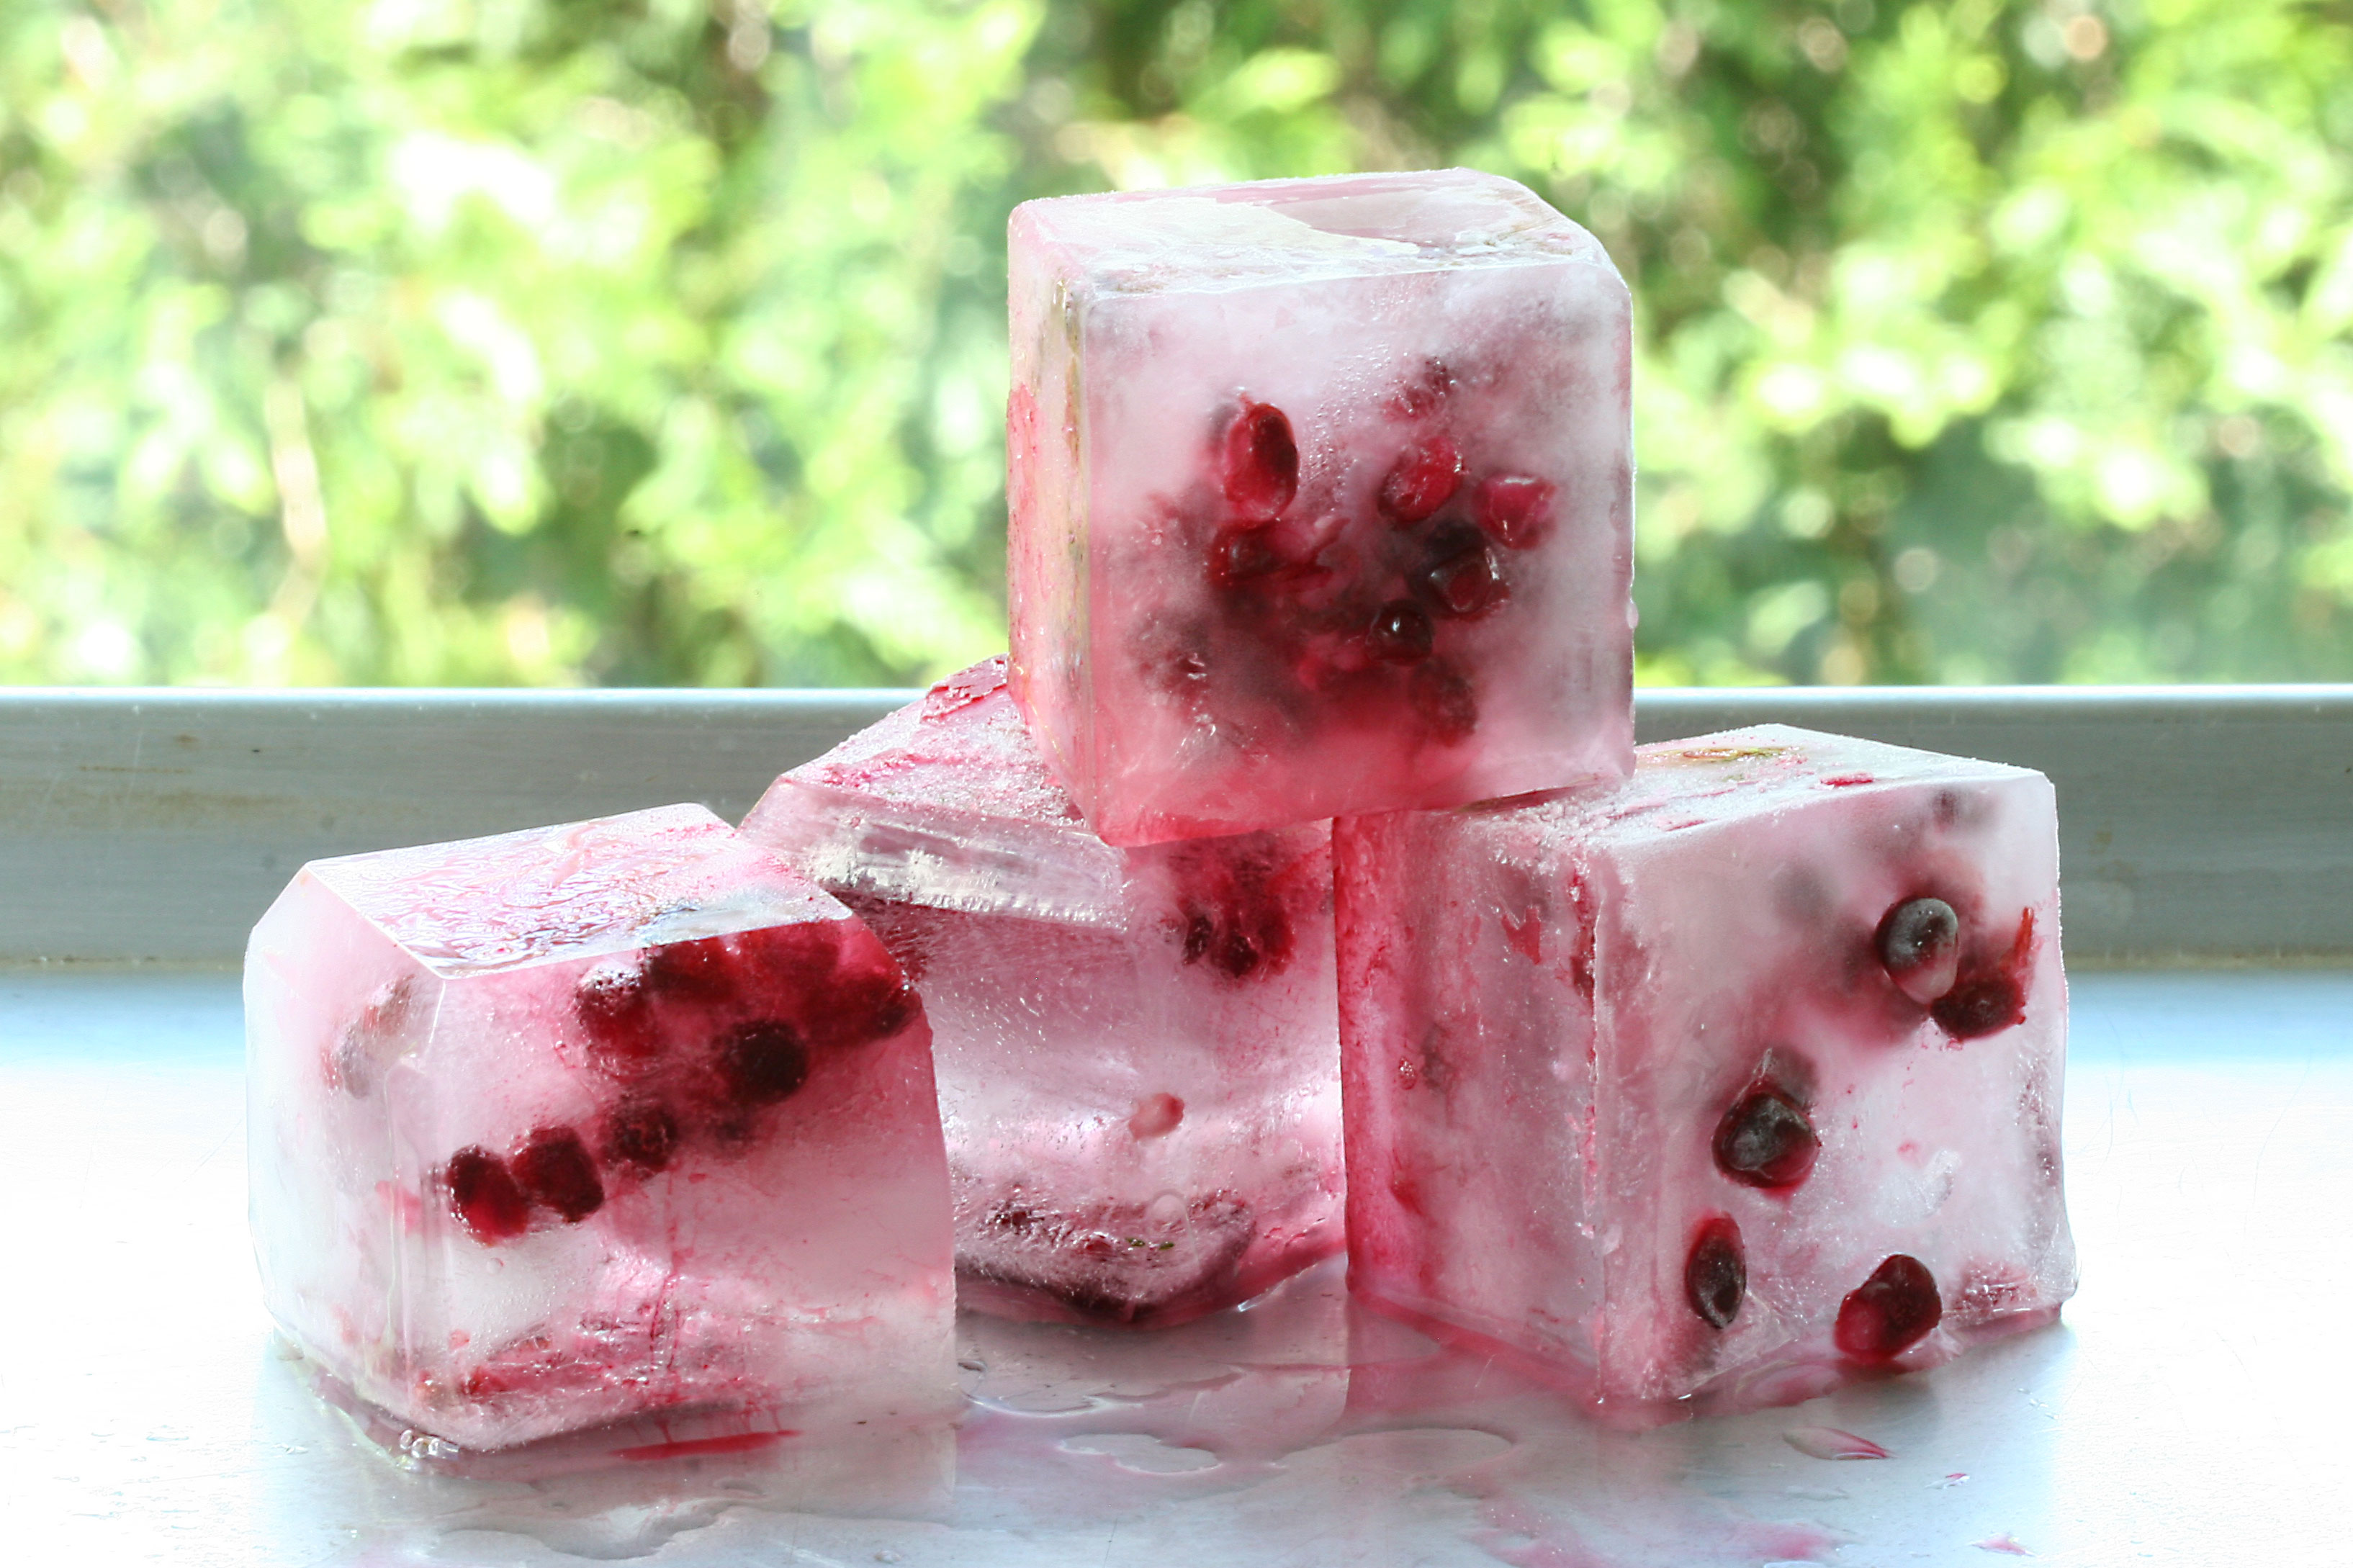 flavored ice cubes with pomegranate